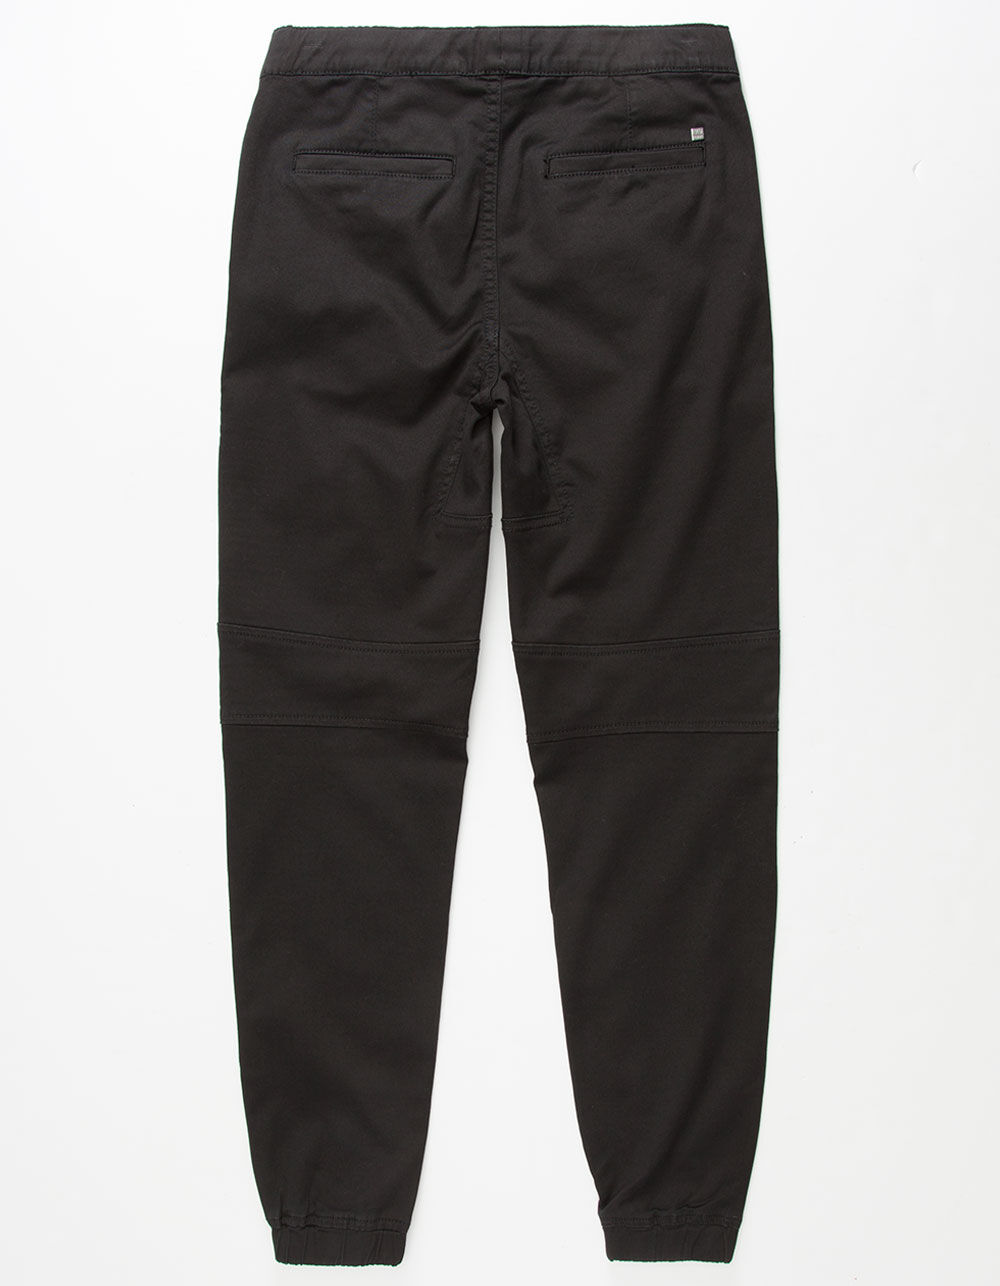 EAST POINTE Moto Boys Twill Jogger Pants image number 1